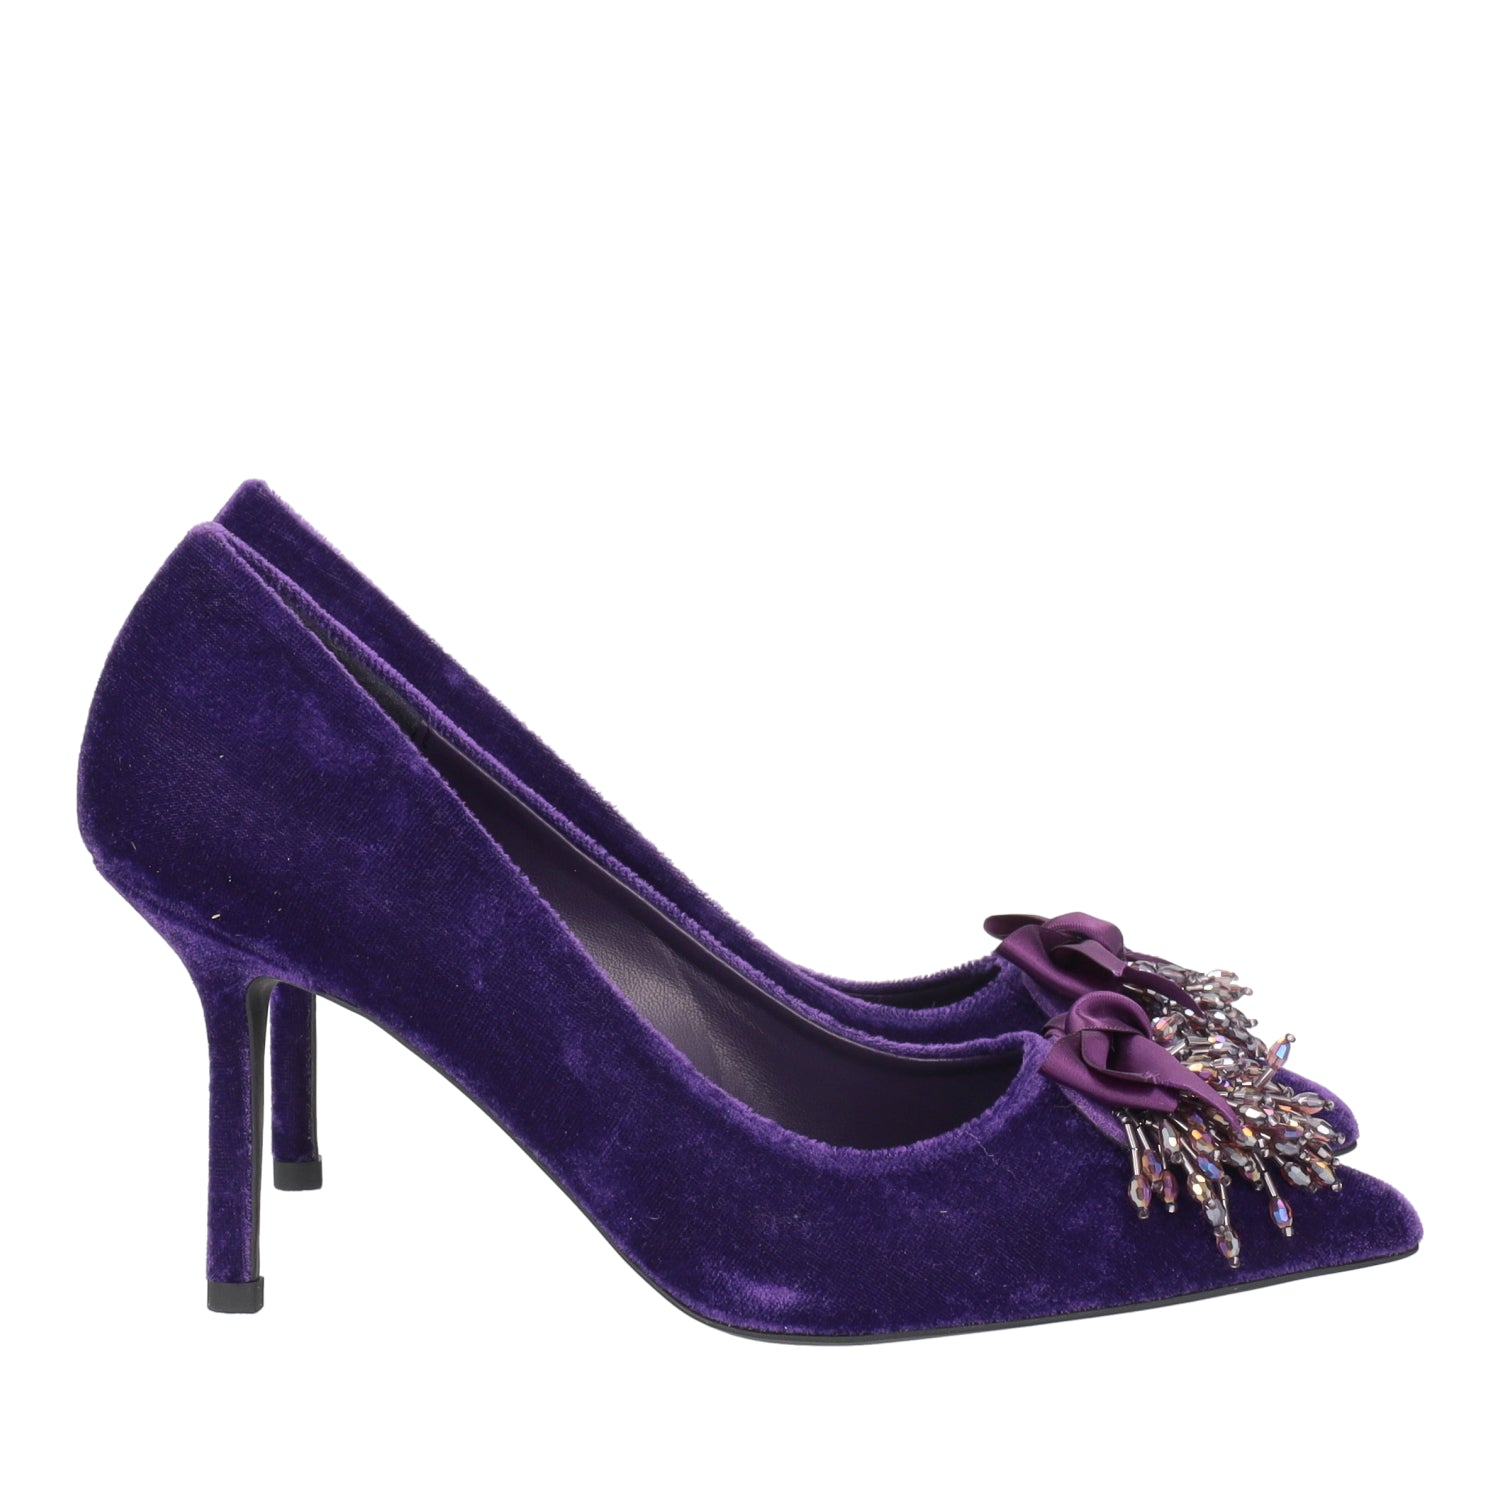 “CHARLOTTE” COURT SHOE IN PURPLE VELVET WITH A MID HEEL & DETAIL